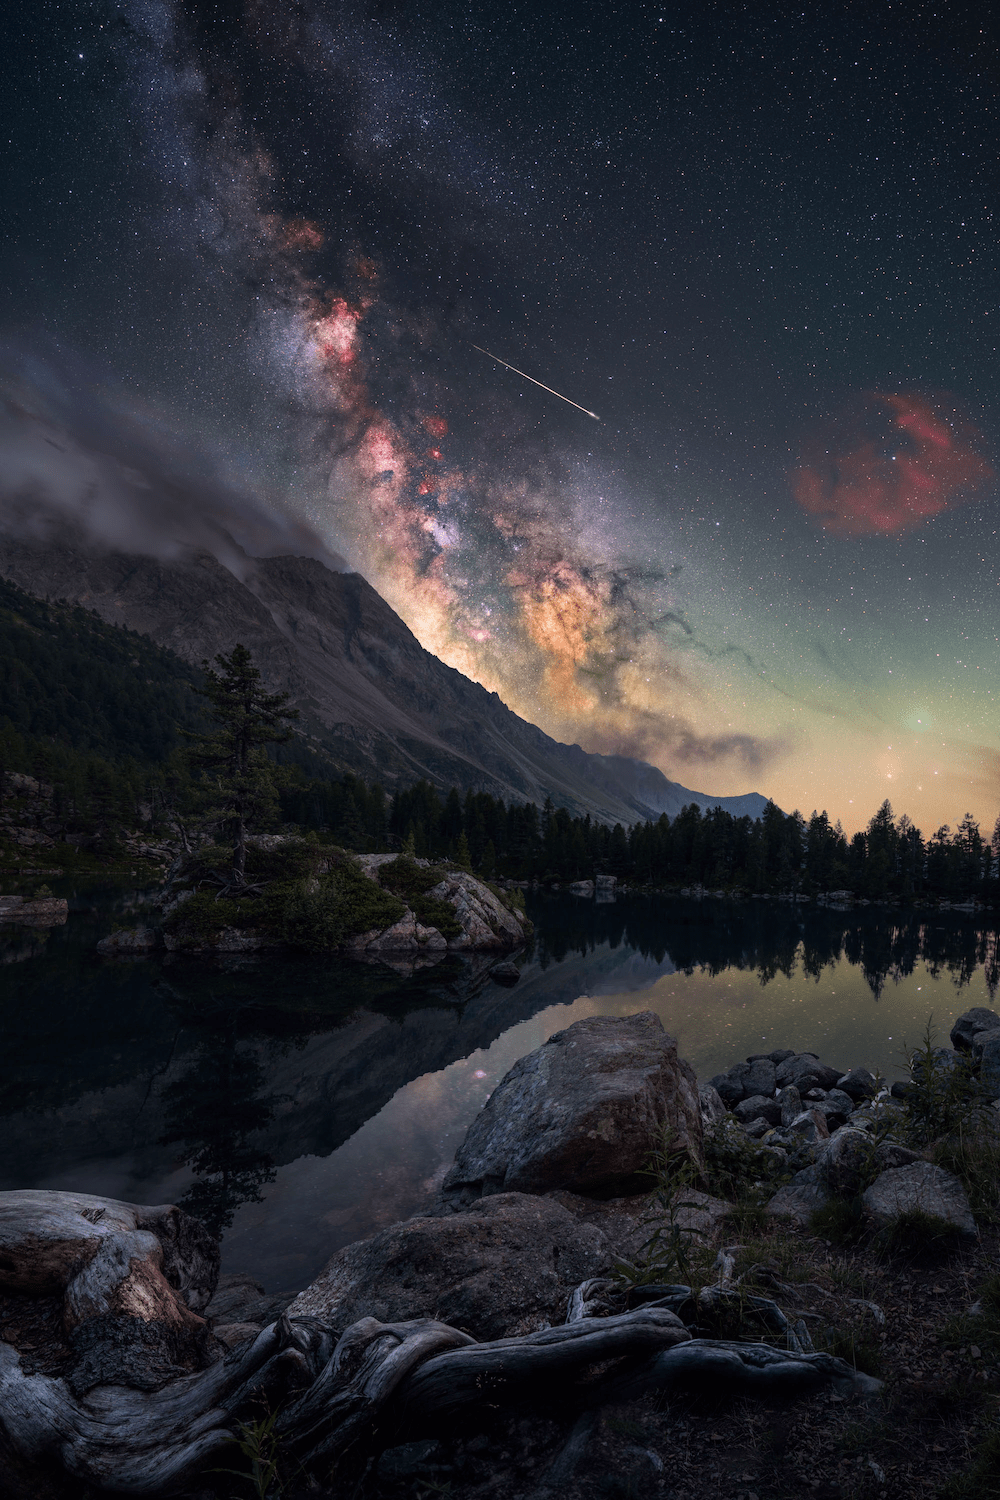 a mountain and lake scene with a shooting star and the milky way